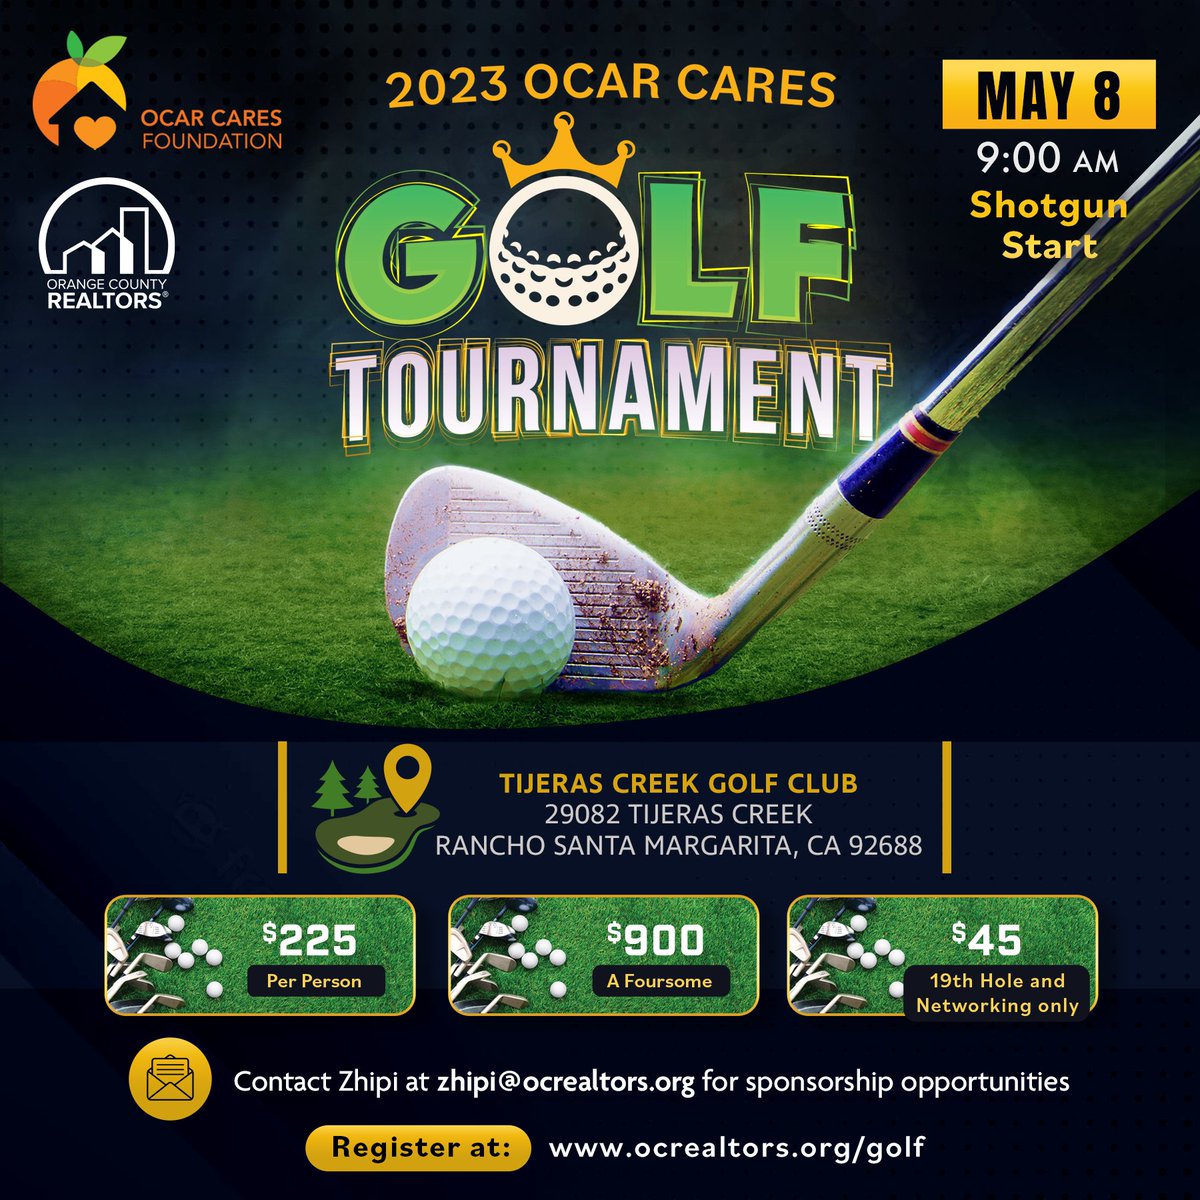 Our OCAR Cares golf tournament is back at the Tijeras Creek Golf Club May 8! To register visit: ocrealtors.org/golf #theocrealtors #ocrealtors #orangecountyreaeltors #realestate #realtors #affiliates #golf #oc #orangecounty #ocarcares